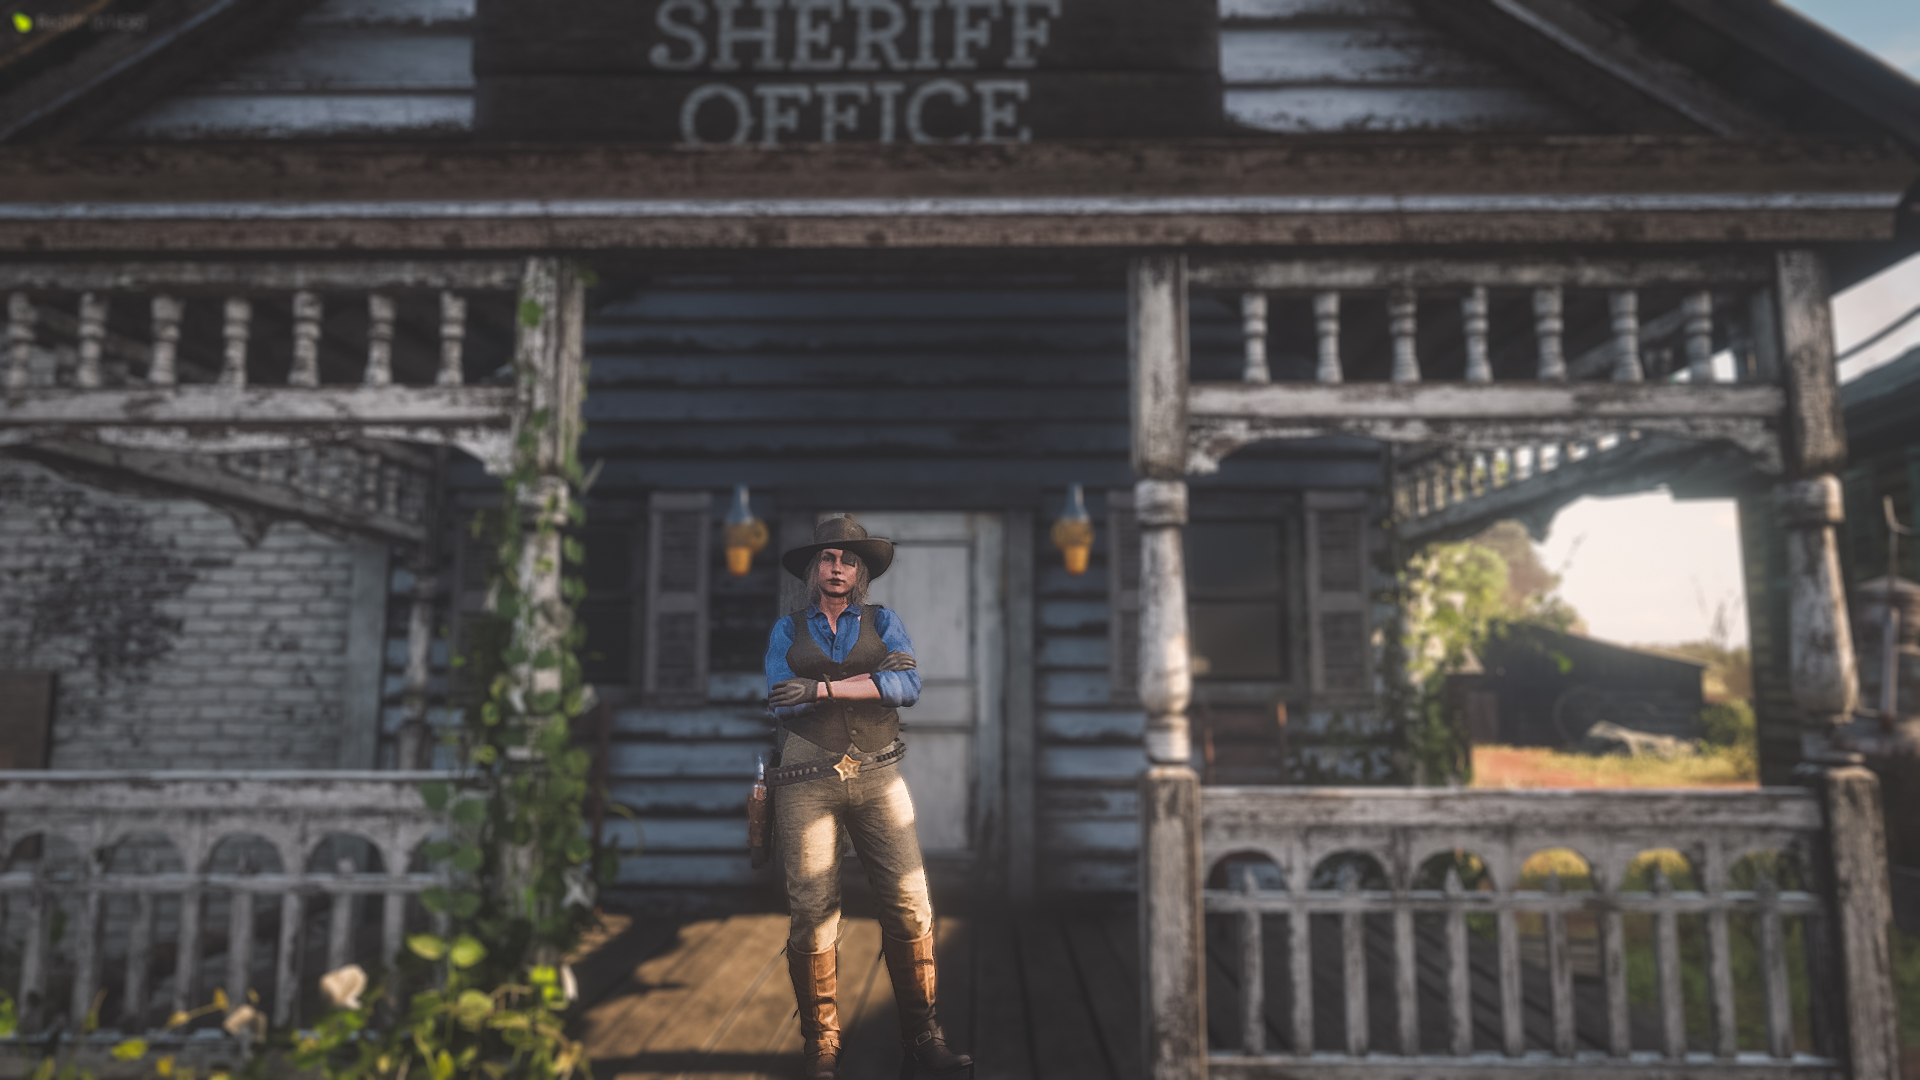 Sheriff Harriet Beaver standing in front of the Rhodes Sheriff Office